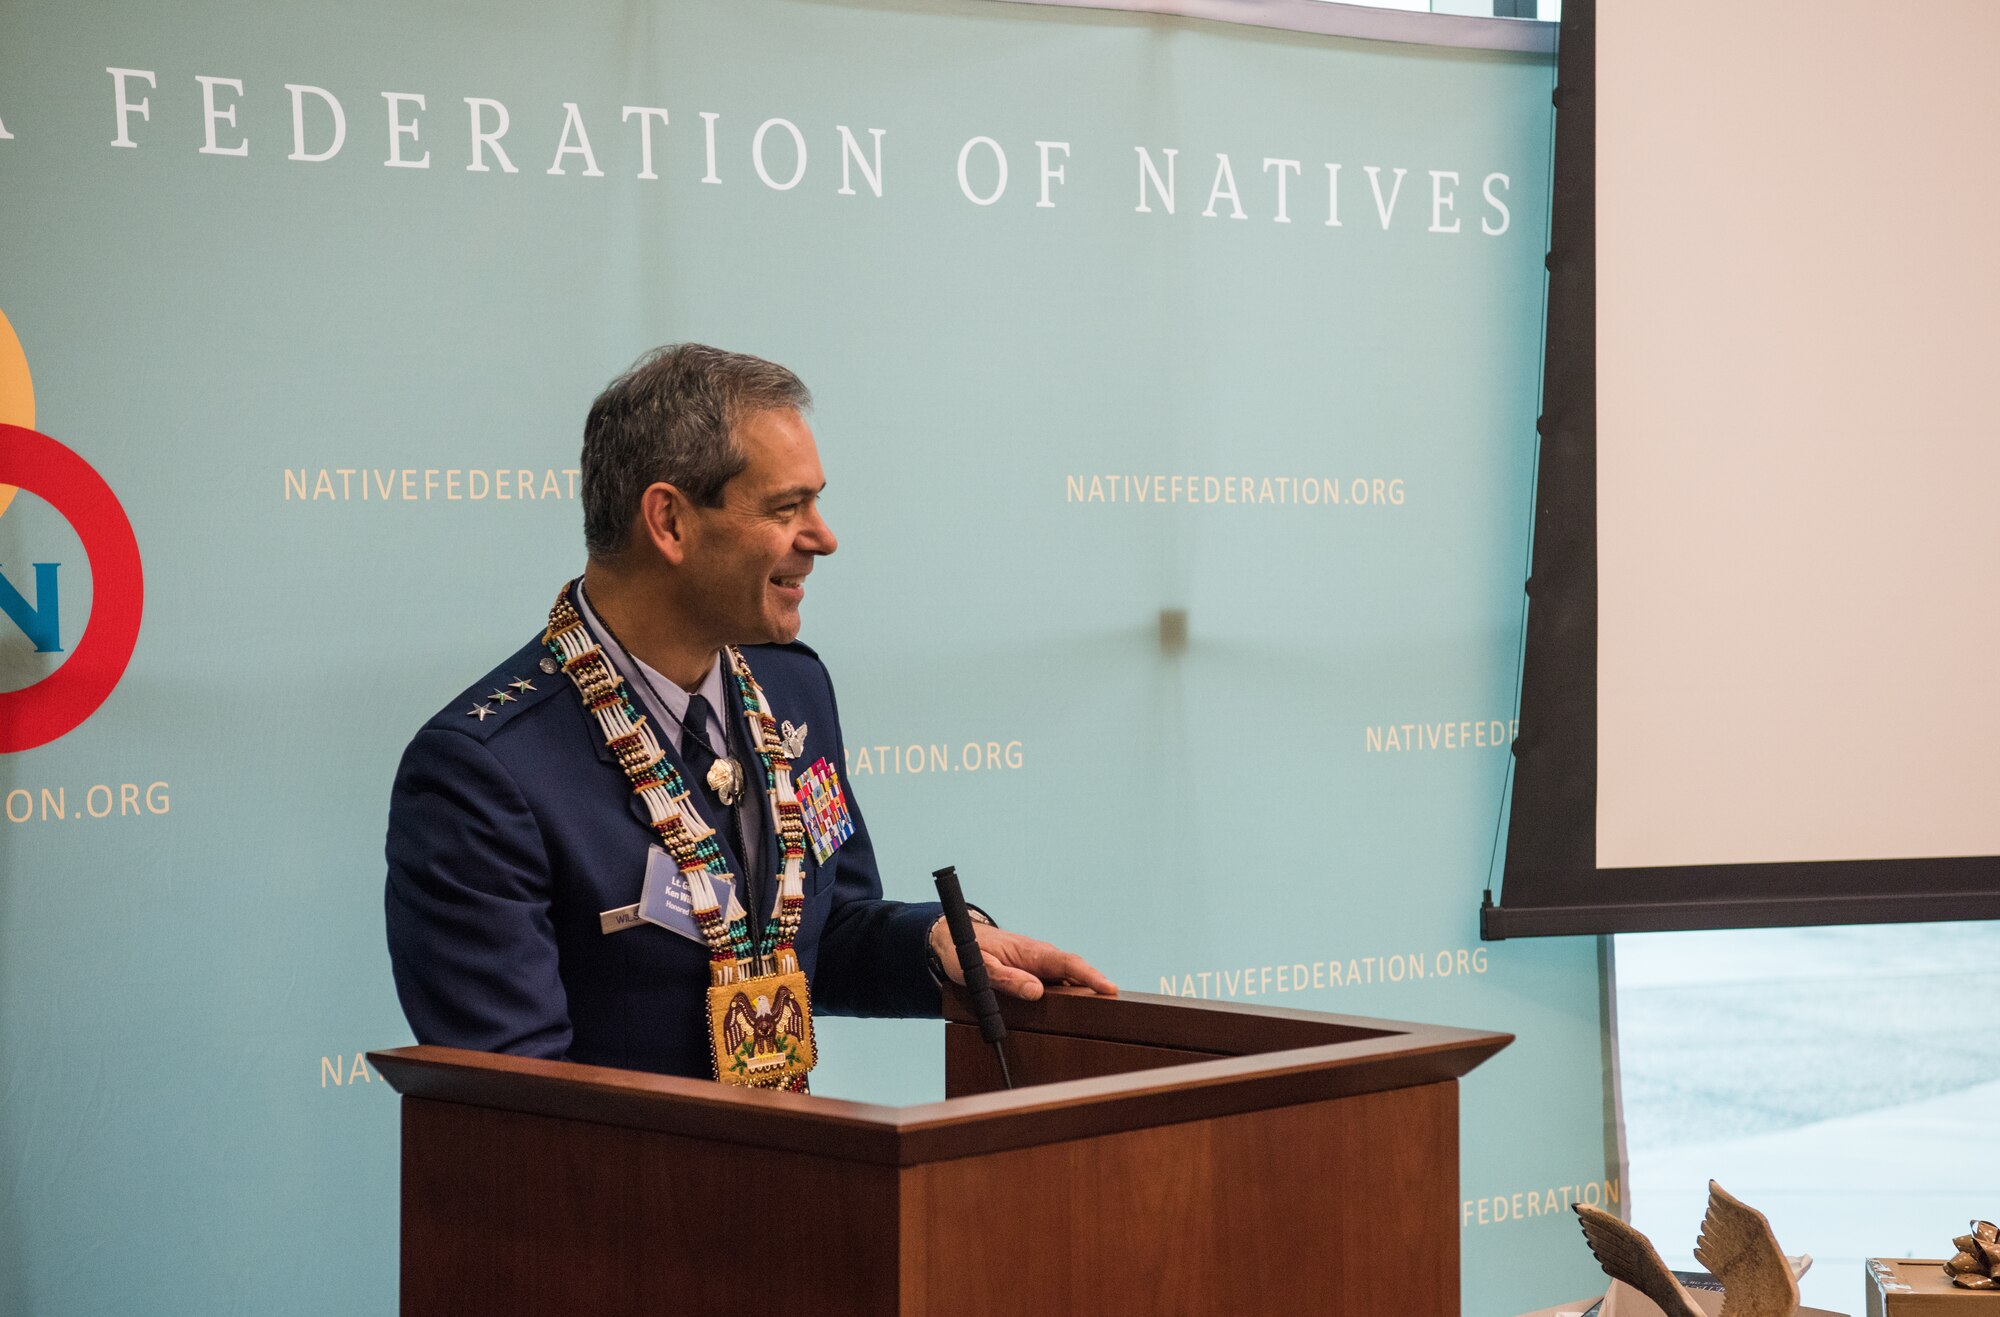 U.S. Air Force Lt. Gen. Ken Wilsbach, commander of Alaskan NORAD Region, Alaskan Command and Eleventh Air Force, speaks during a Native Alaska naming ceremony at the Fireweed Convention Center in Anchorage, Alaska, Aug. 21, 2018. The Alaskan Federation of Natives hosted the unique event honoring Wilsbach for his service and involvement with Native Alaskan communities during his tenure in Alaska. It marked the first time in Alaska Native history a U.S. Armed forces general officer was given multiple Native names.